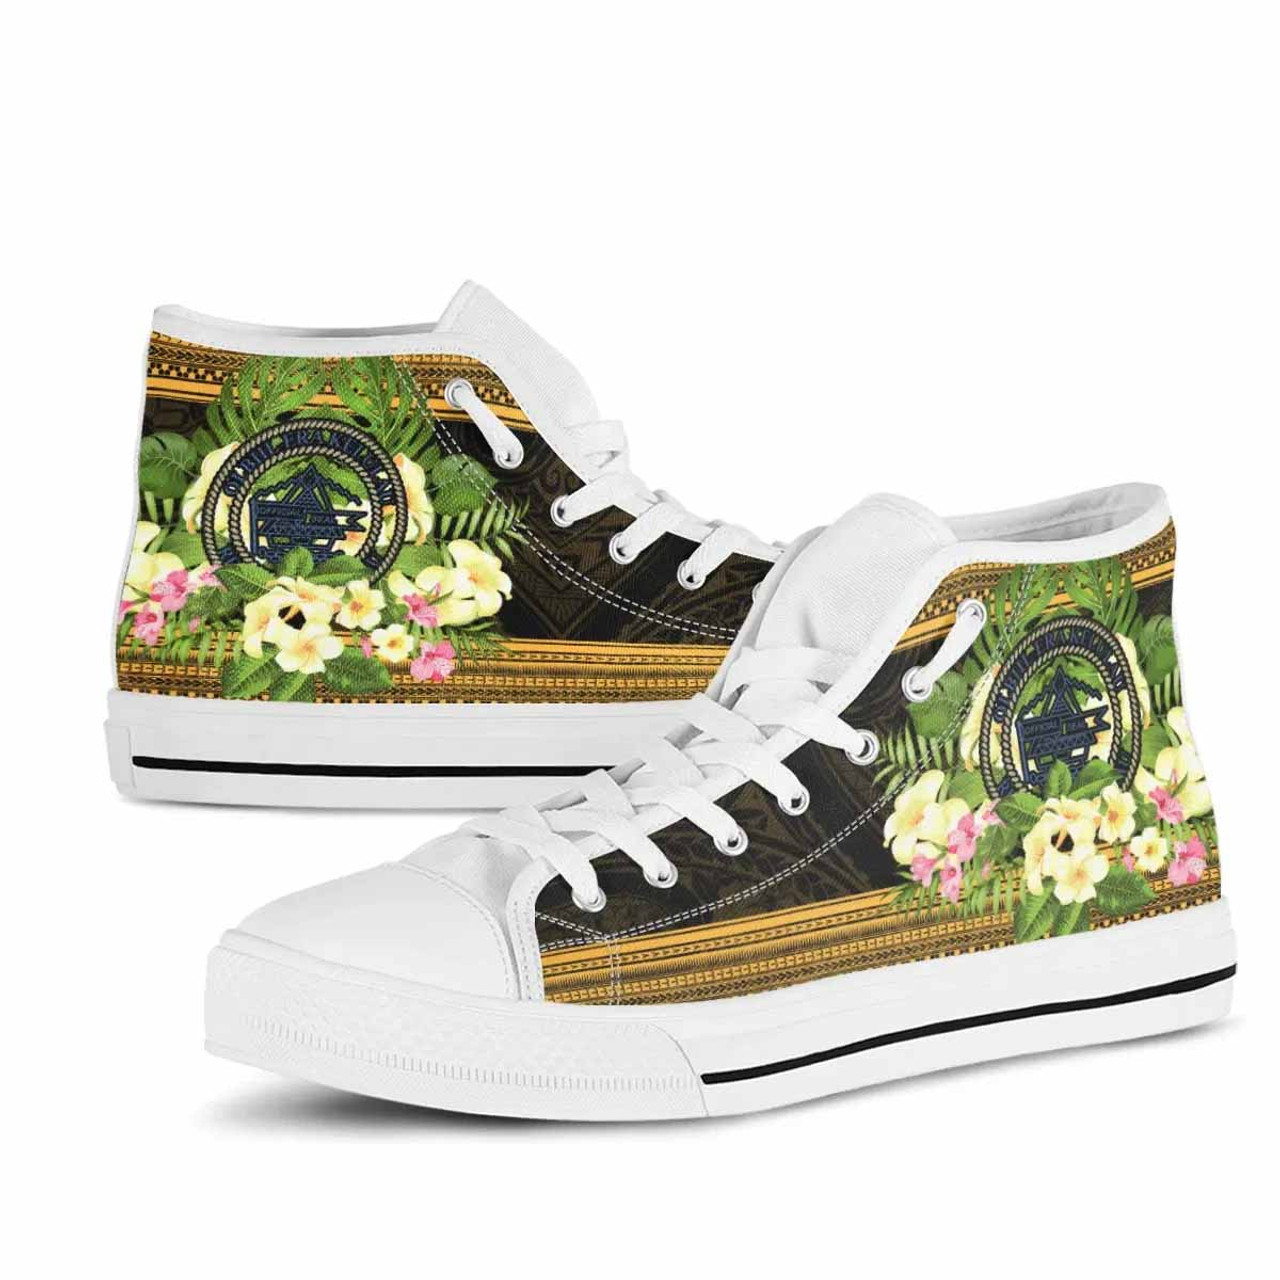 Palau High Top Shoes - Polynesian Gold Patterns Collection 10